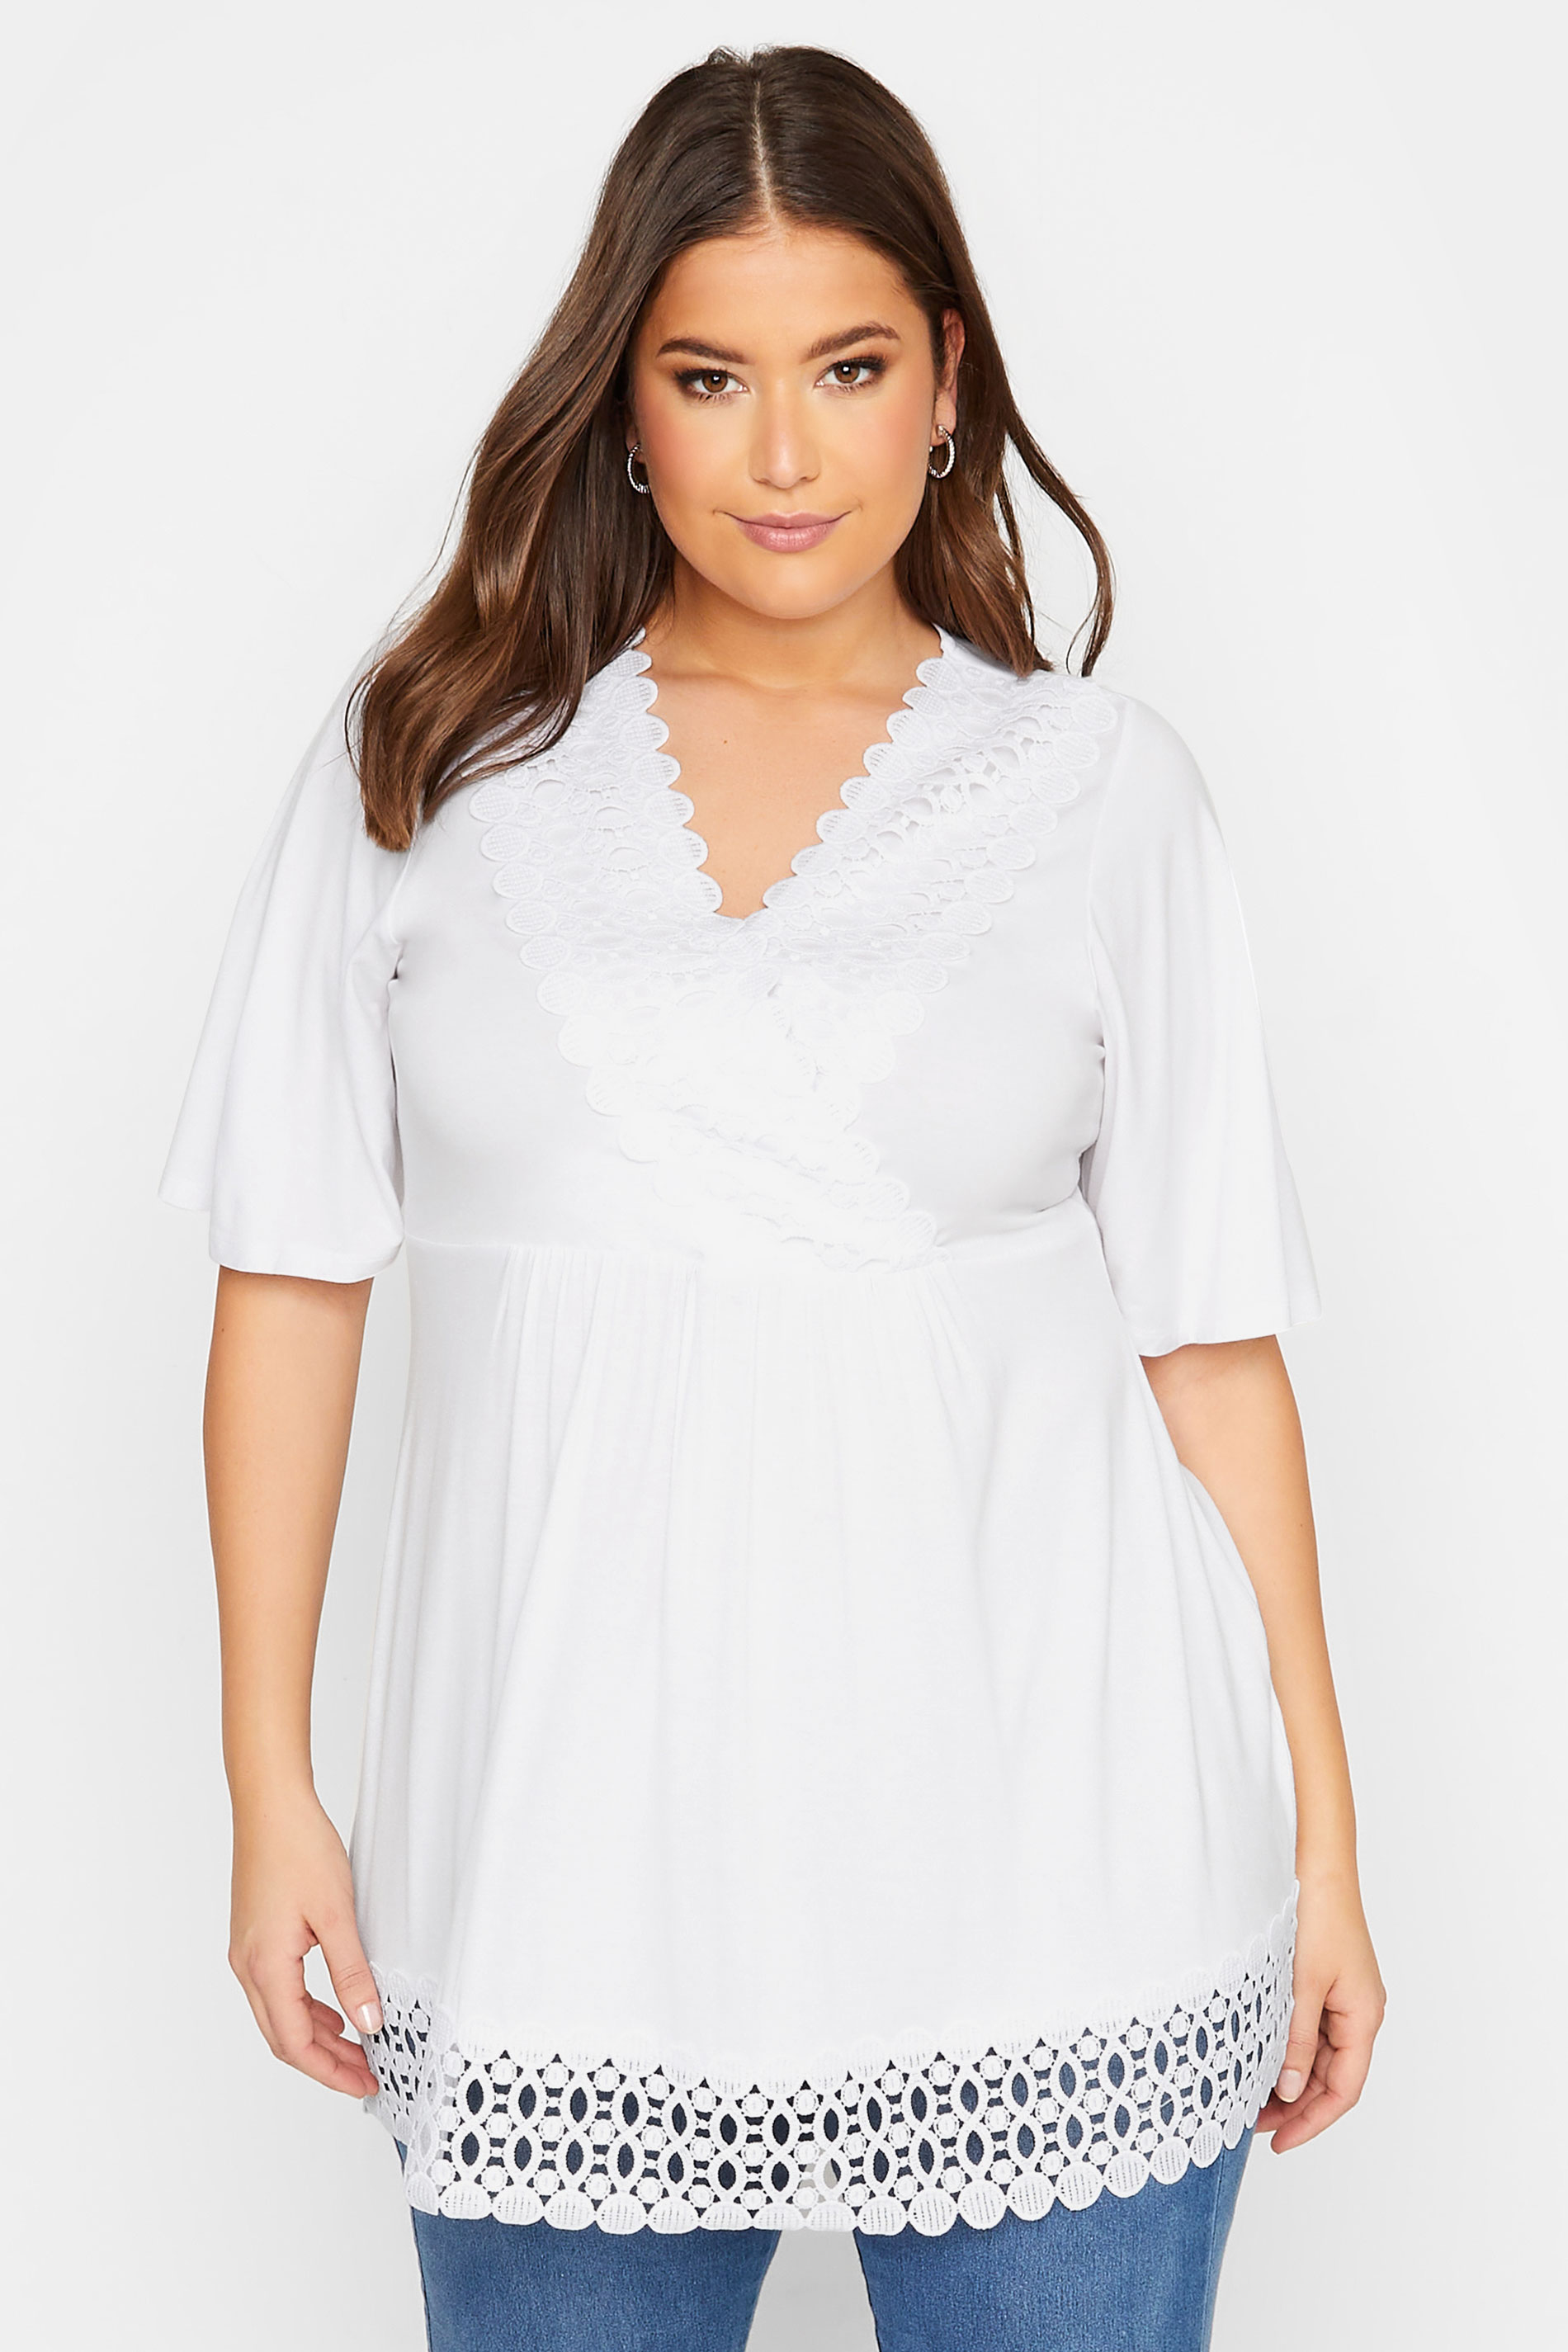 YOURS Plus Size White Crochet Trim Peplum Tunic Top | Yours Clothing 1